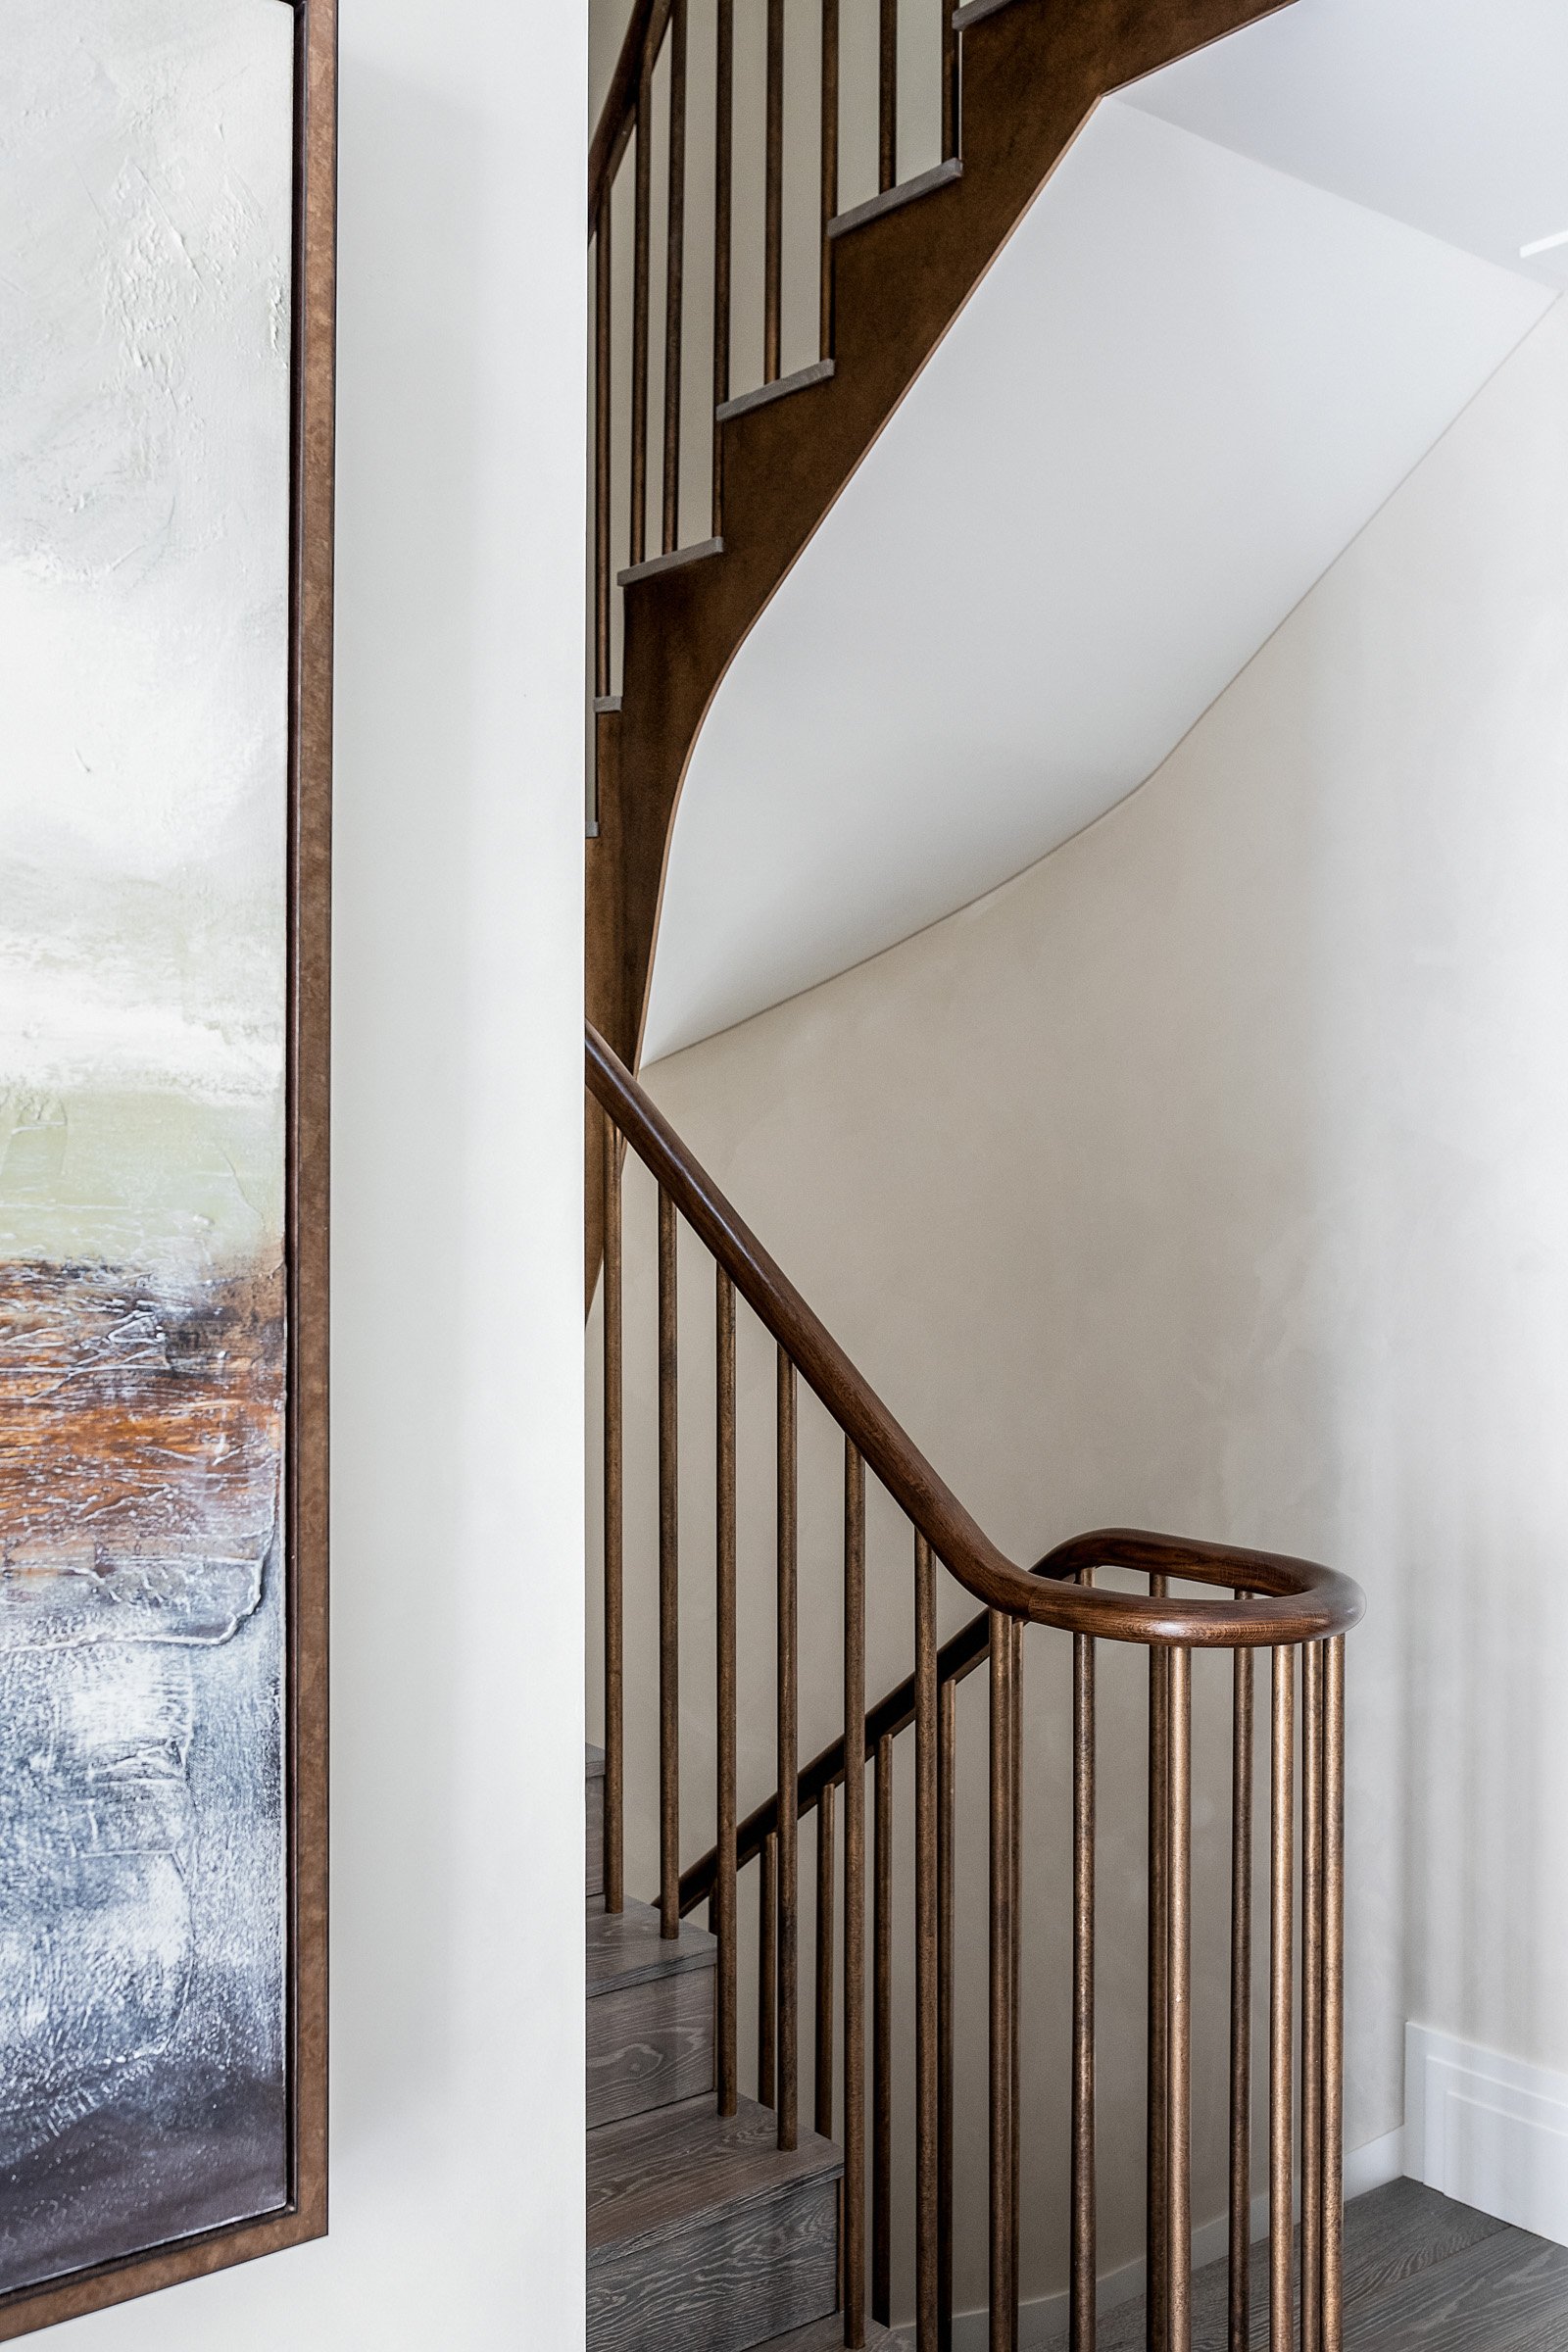 Details in a home being designed by Accouter's luxury designers in Belgravia, London